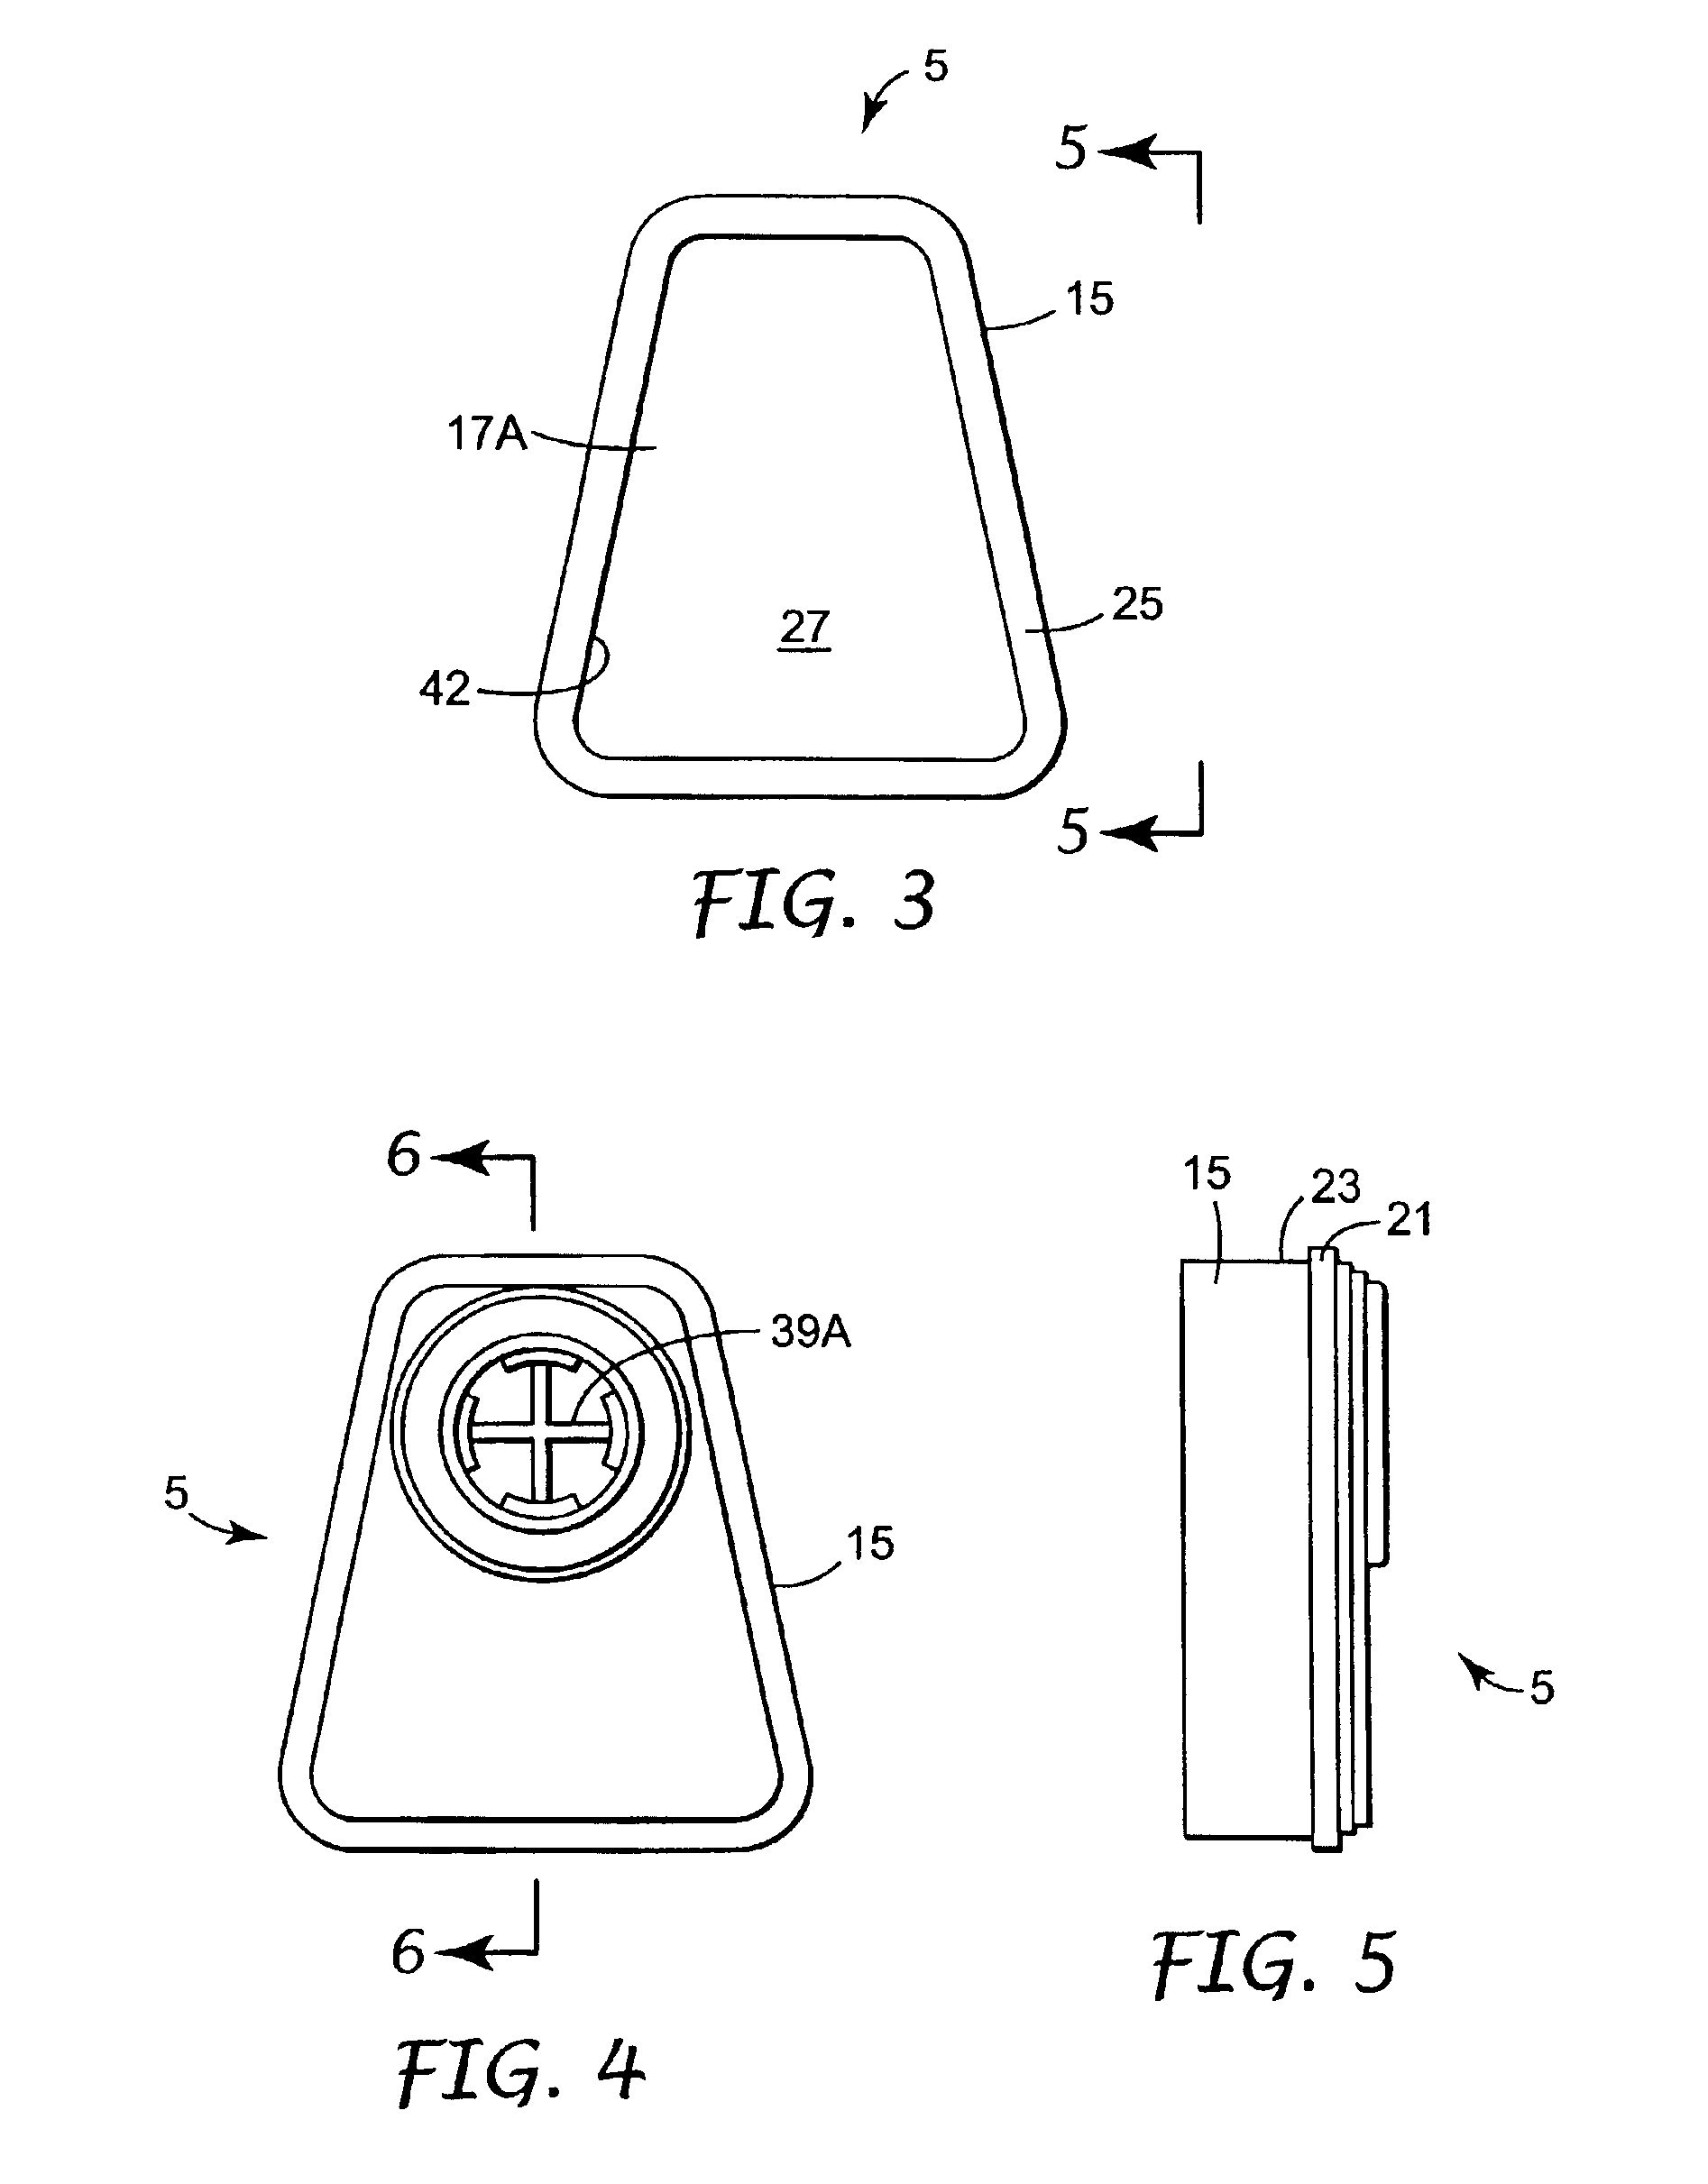 Filter element that has a thermo-formed housing around filter material